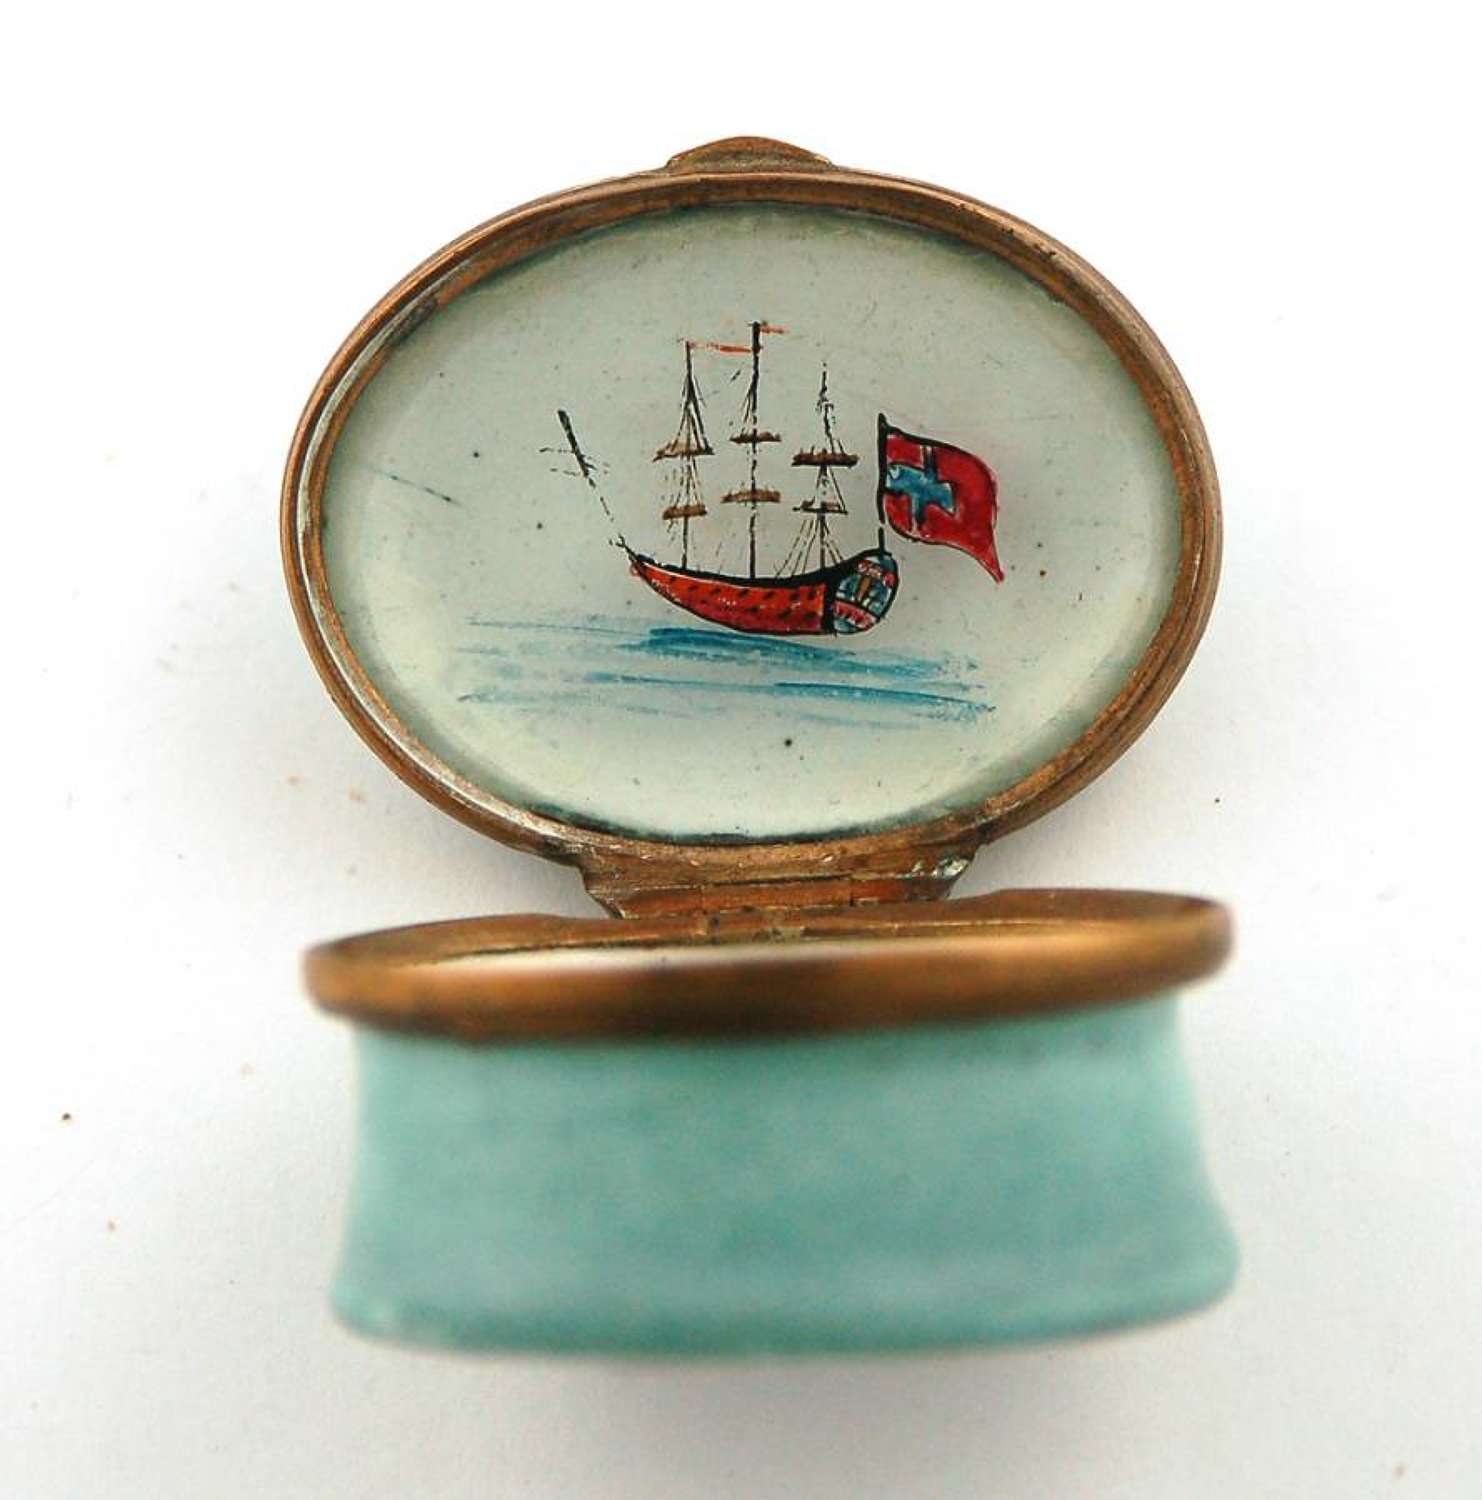 Enamel patch with ship interior